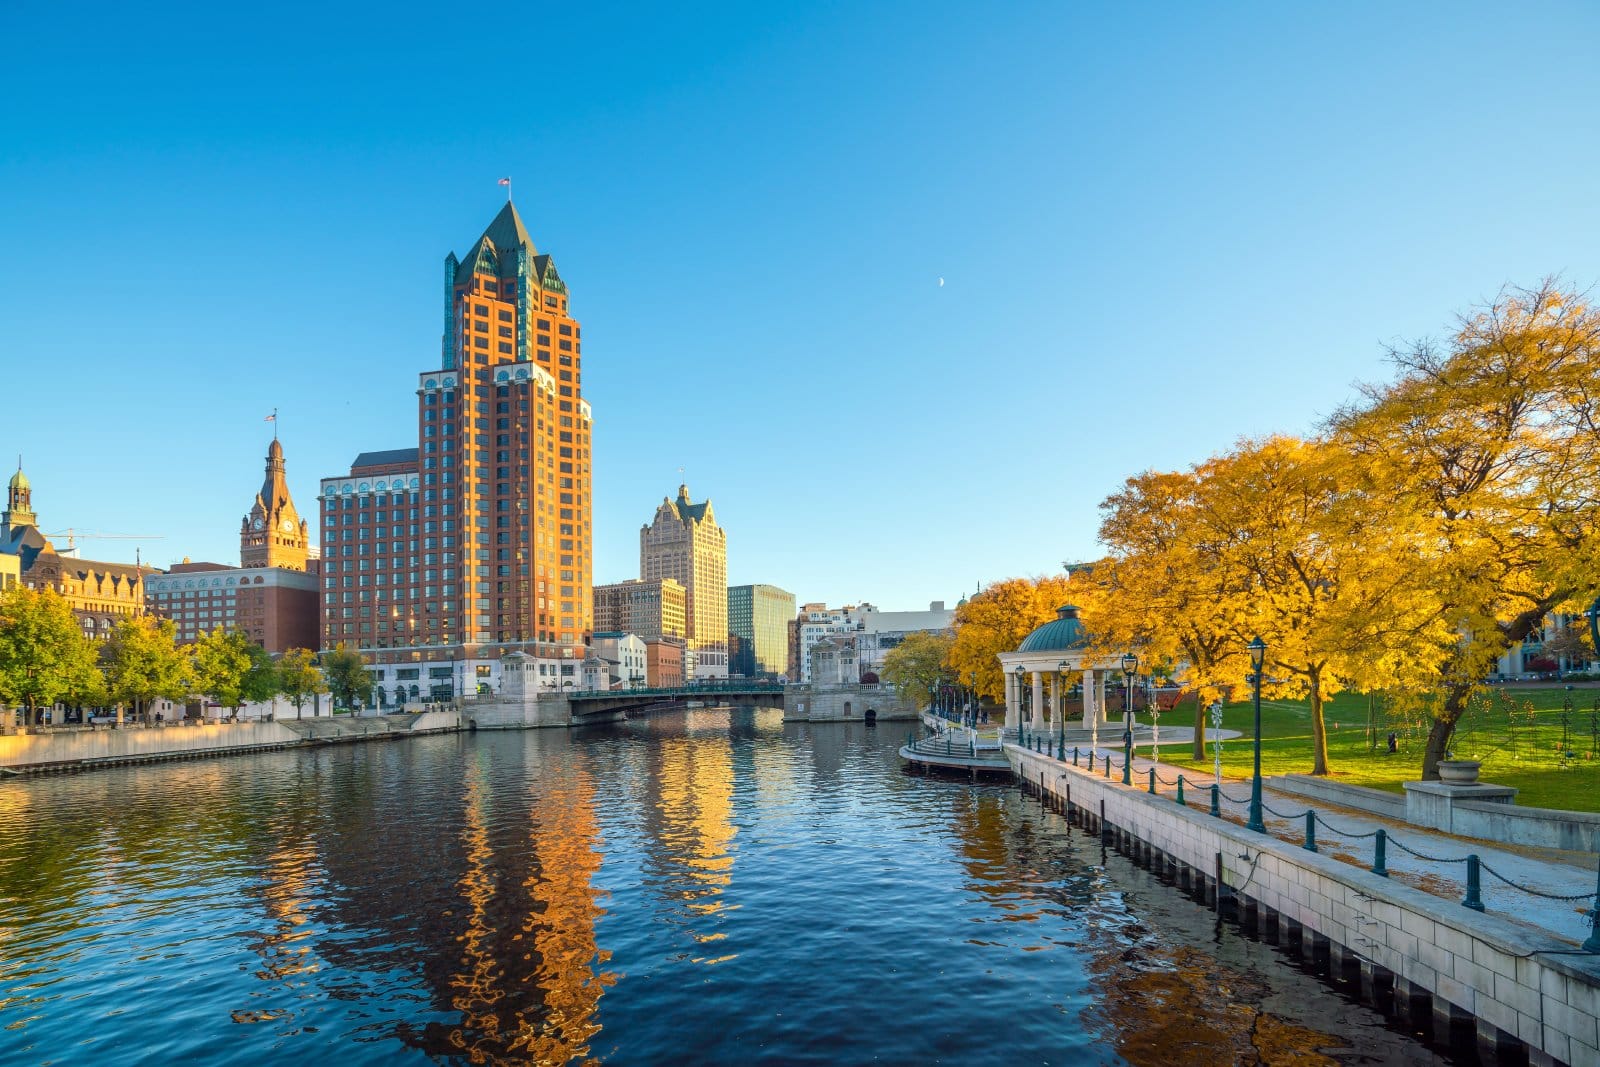 Image Credit: Shutterstock / f11photo <p>Hey there, cheeseheads! Wisconsin is the place to be for all things dairy, with cheese curds, beer brats, and cheese-filled everything on the menu. Wash it all down with a cold pint of local craft beer, and you’ve got yourself a Midwestern feast fit for a king. So what are you waiting for? Dig in!</p>